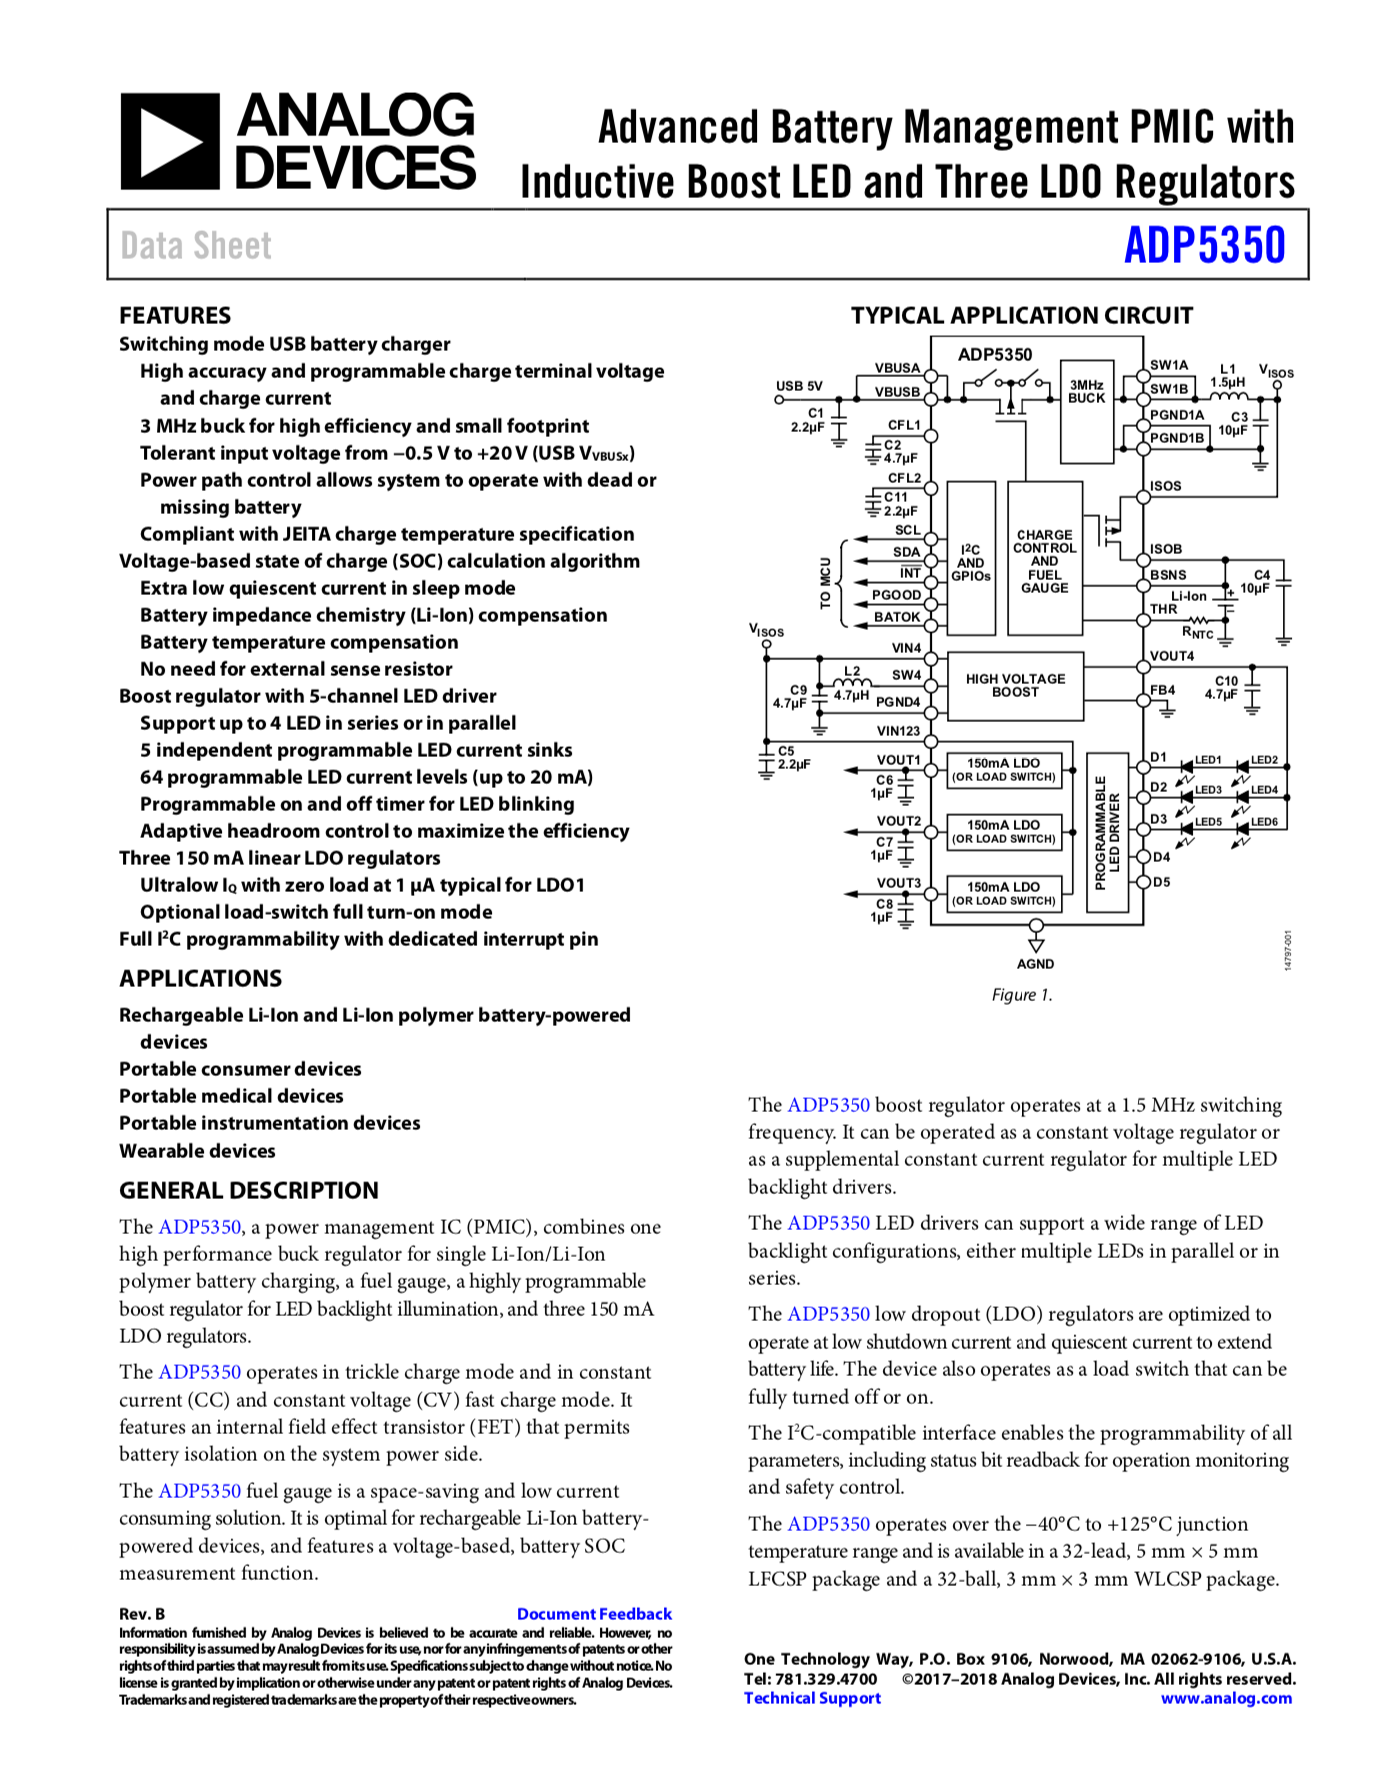 Analog Devices Datasheet for a PMIC (Power management IC)